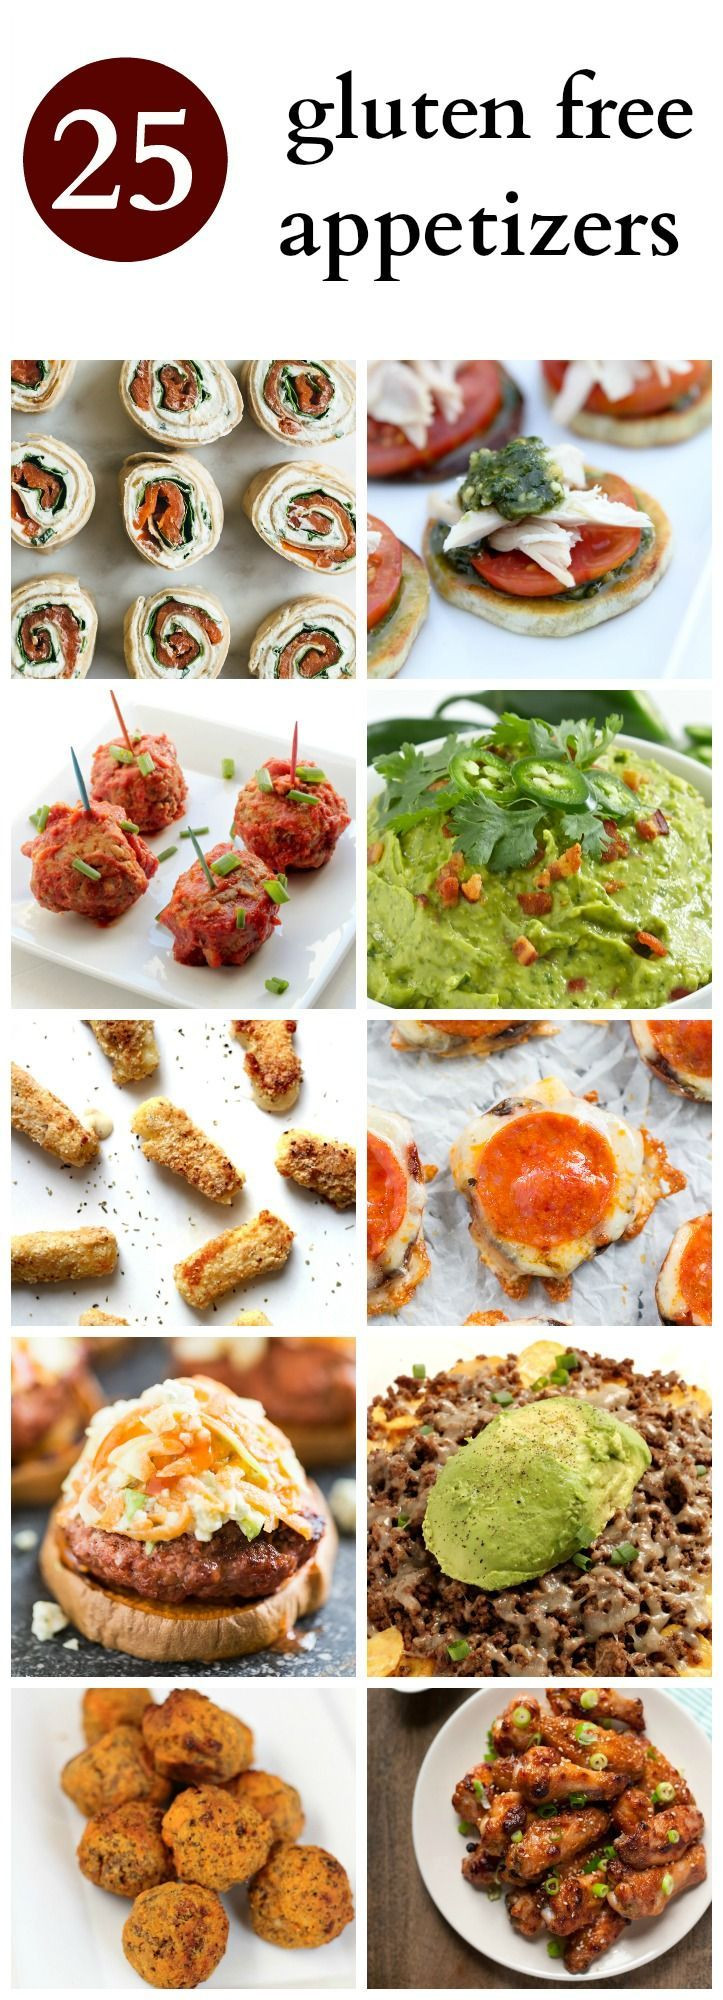 Gluten And Dairy Free Appetizers
 25 best ideas about Gluten Free Appetizers on Pinterest